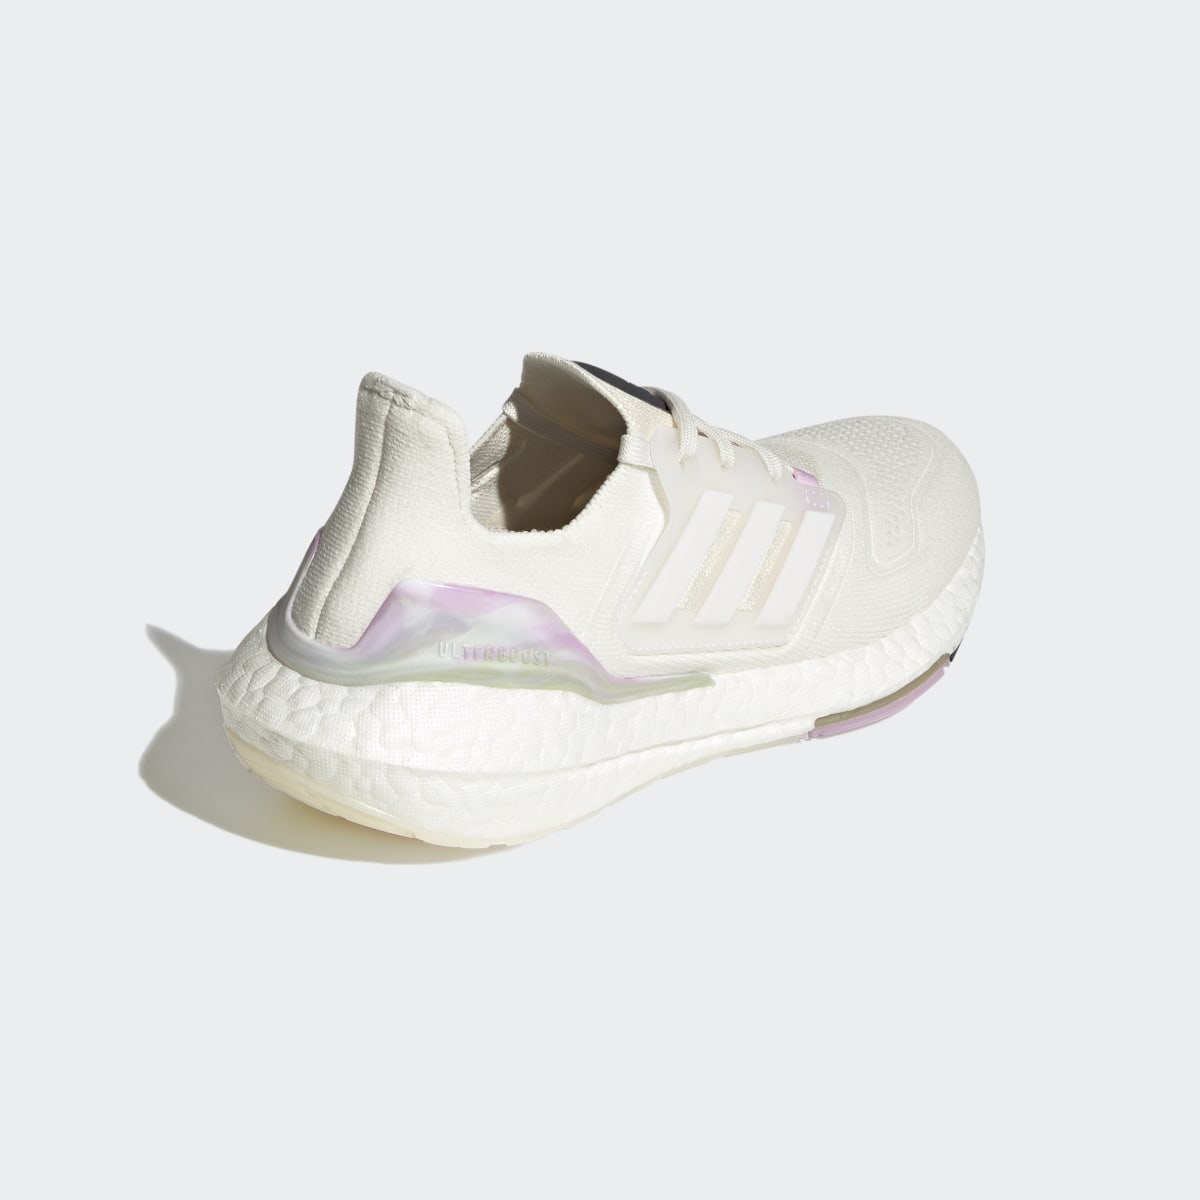 Adidas Ultraboost 22 Made With Nature Shoes. 9